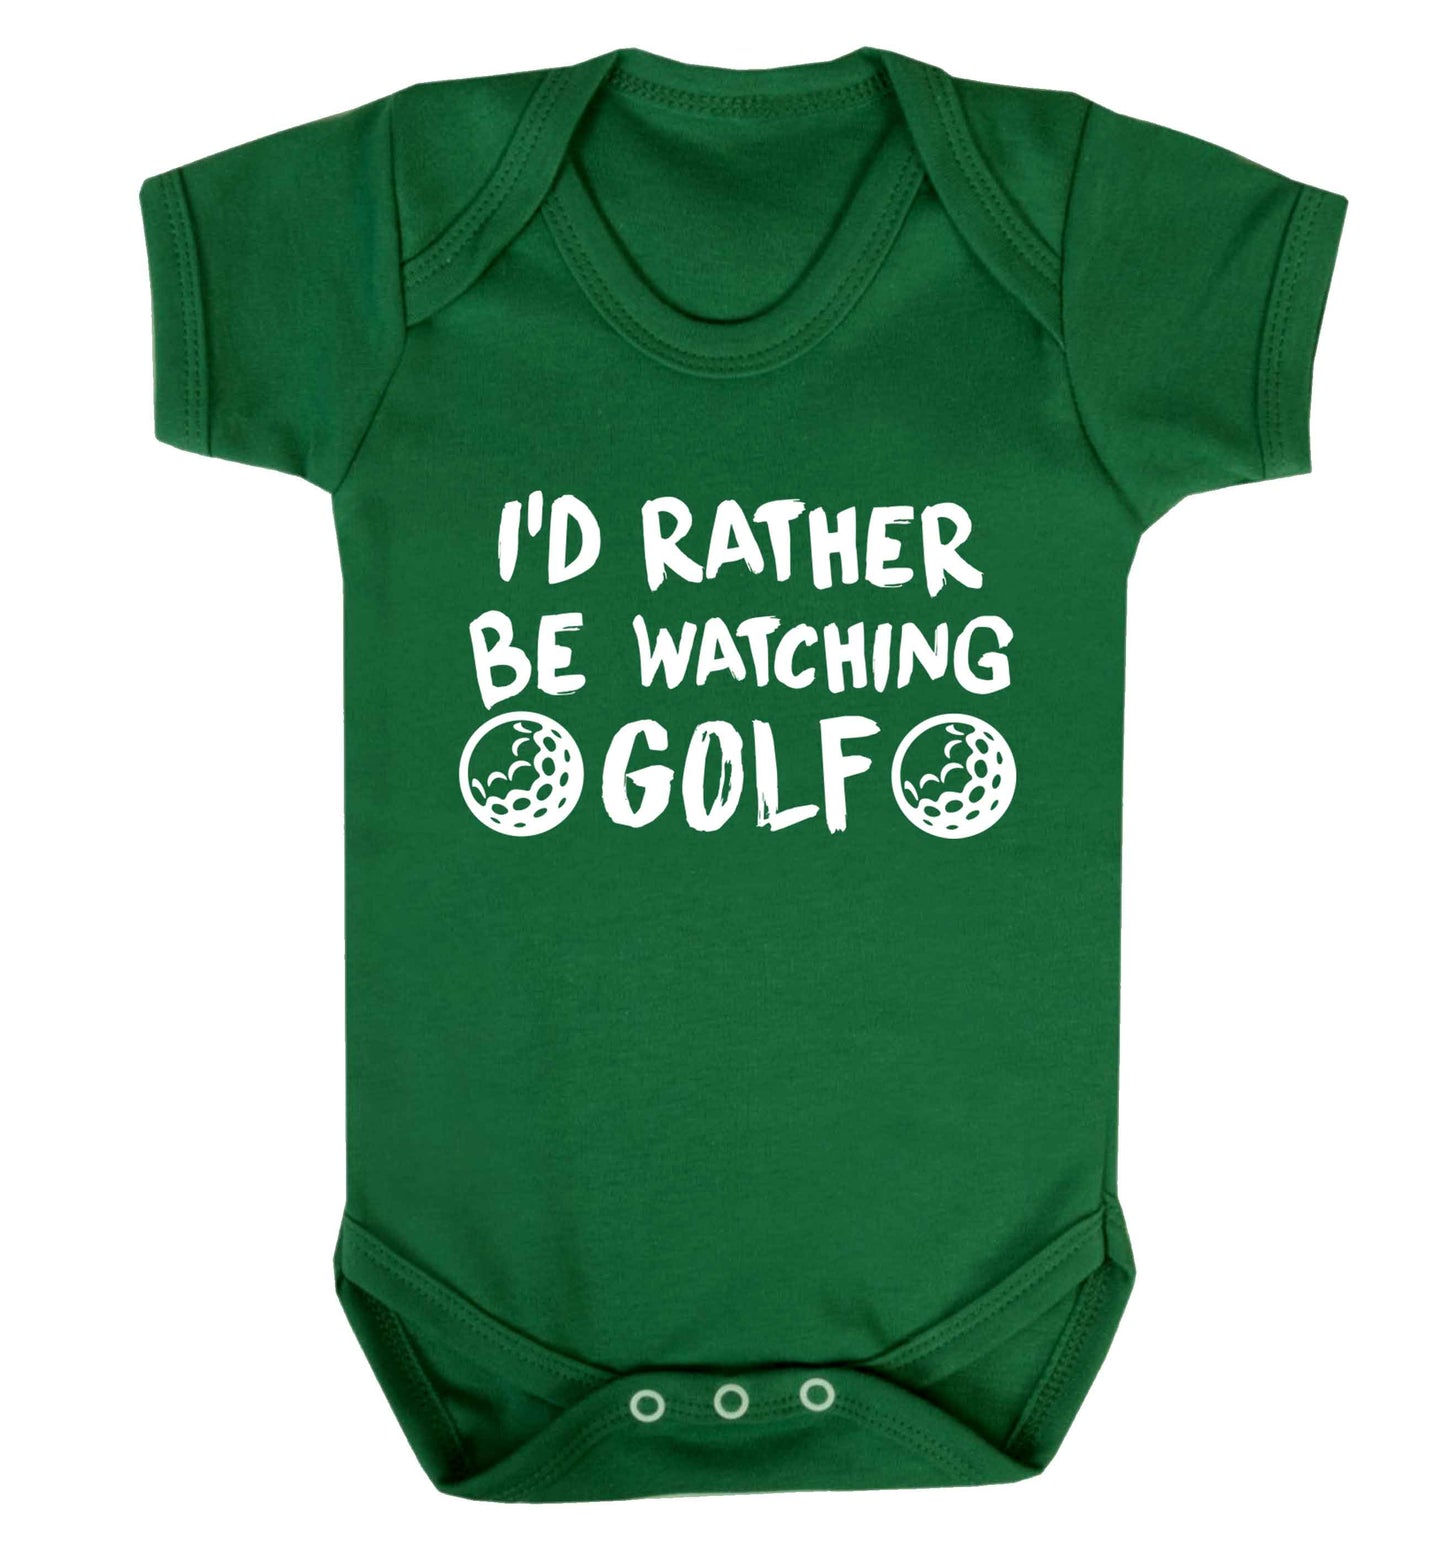 I'd rather be watching golf Baby Vest green 18-24 months